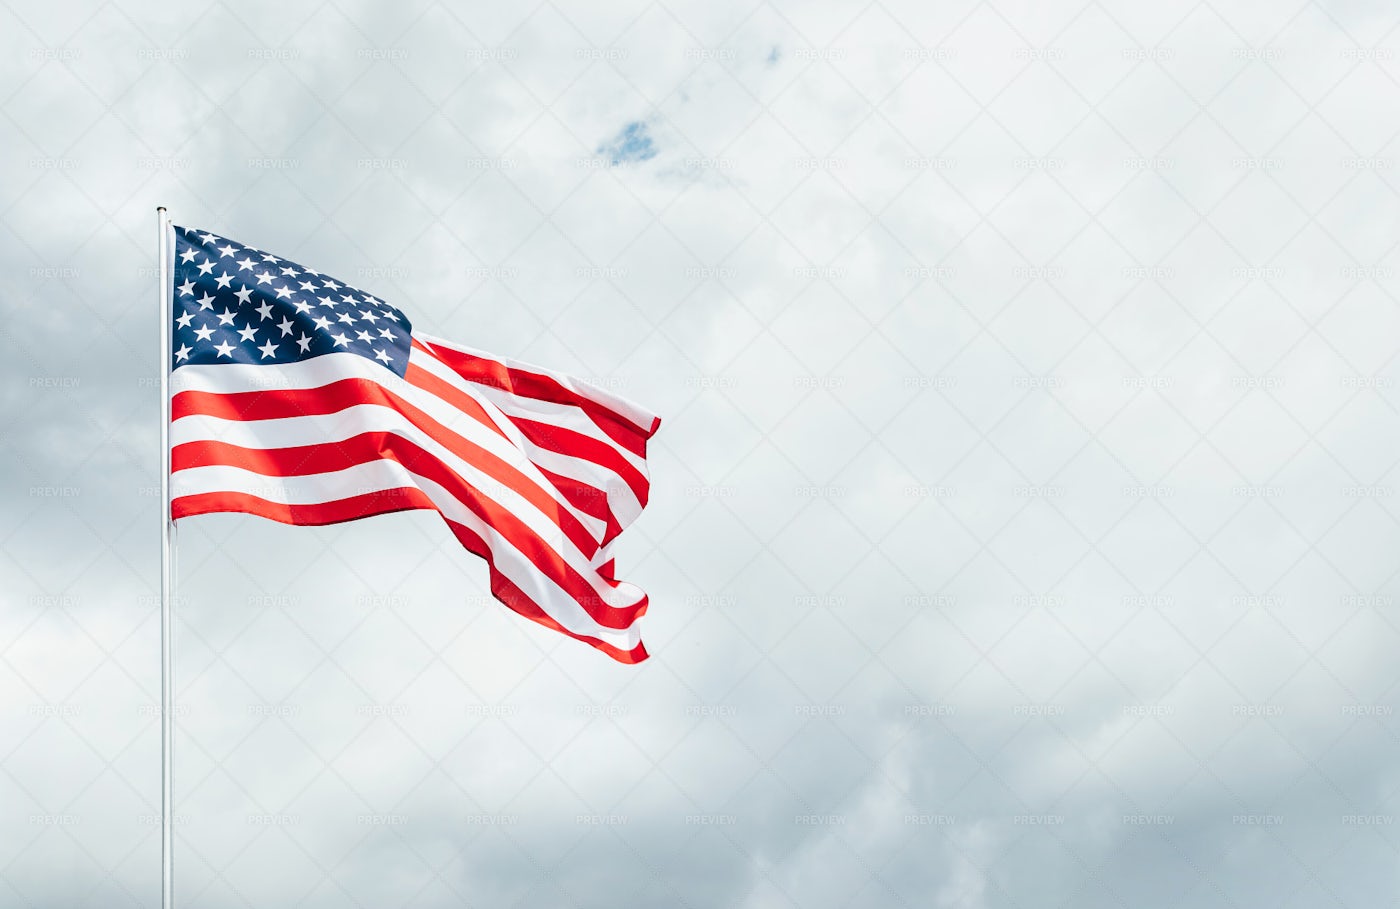 USA Flag In Wind: Stock Photos